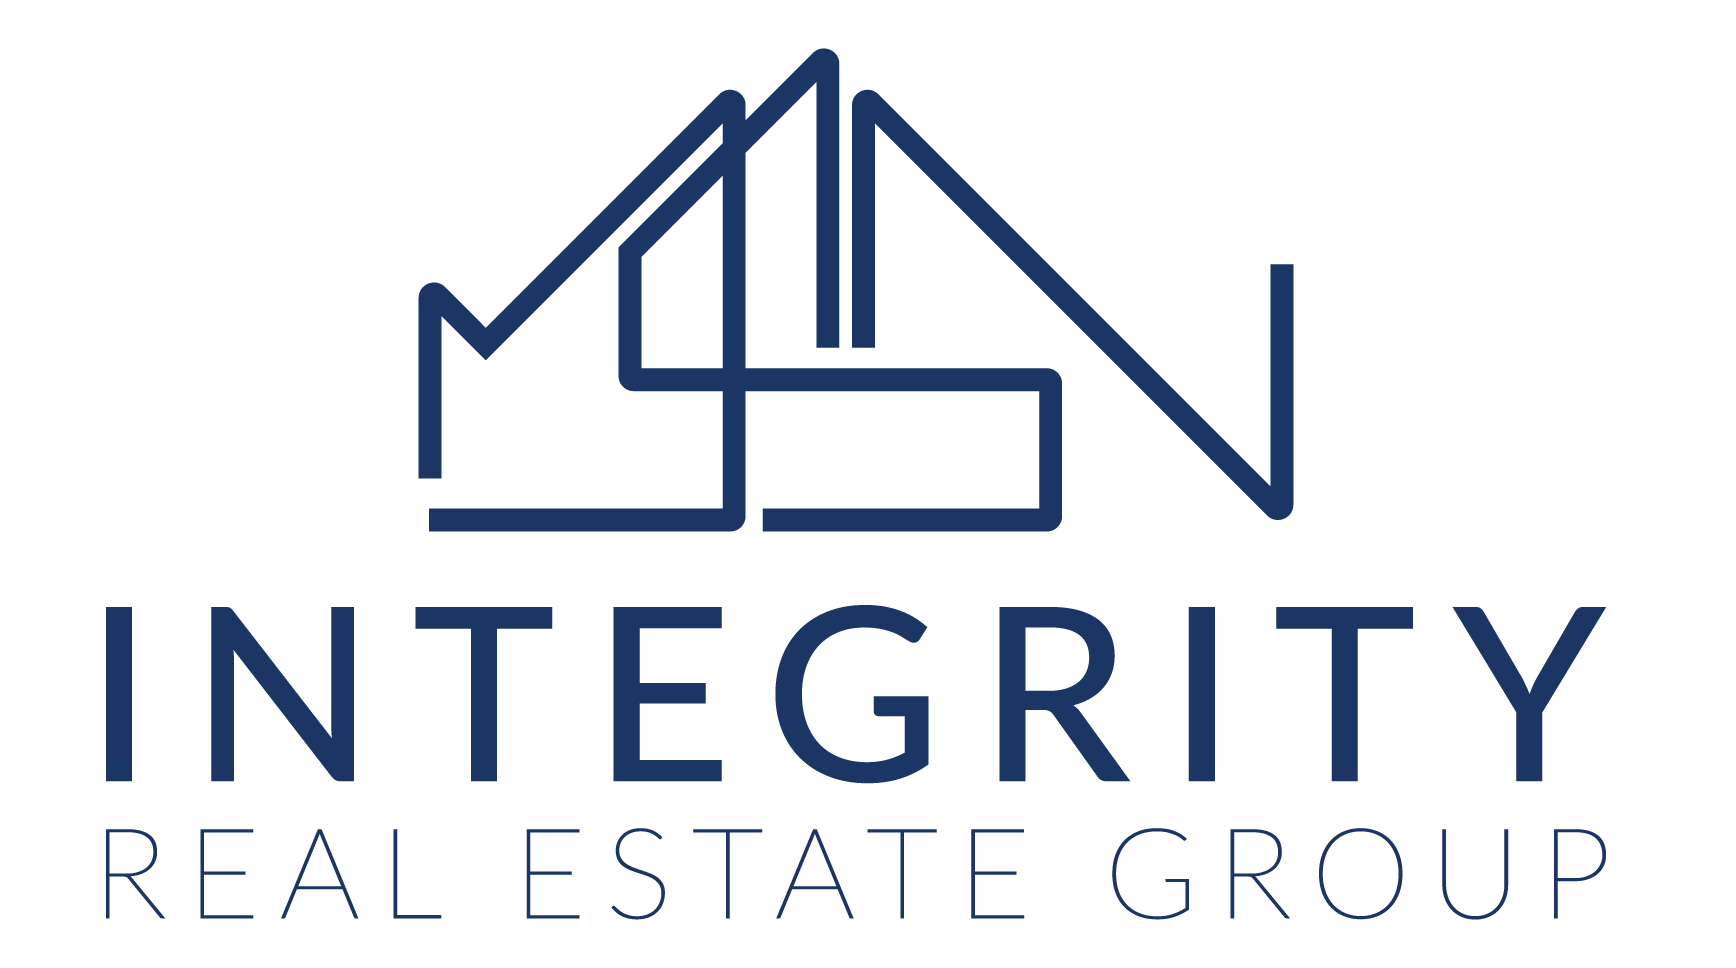 Integrity Real Estate